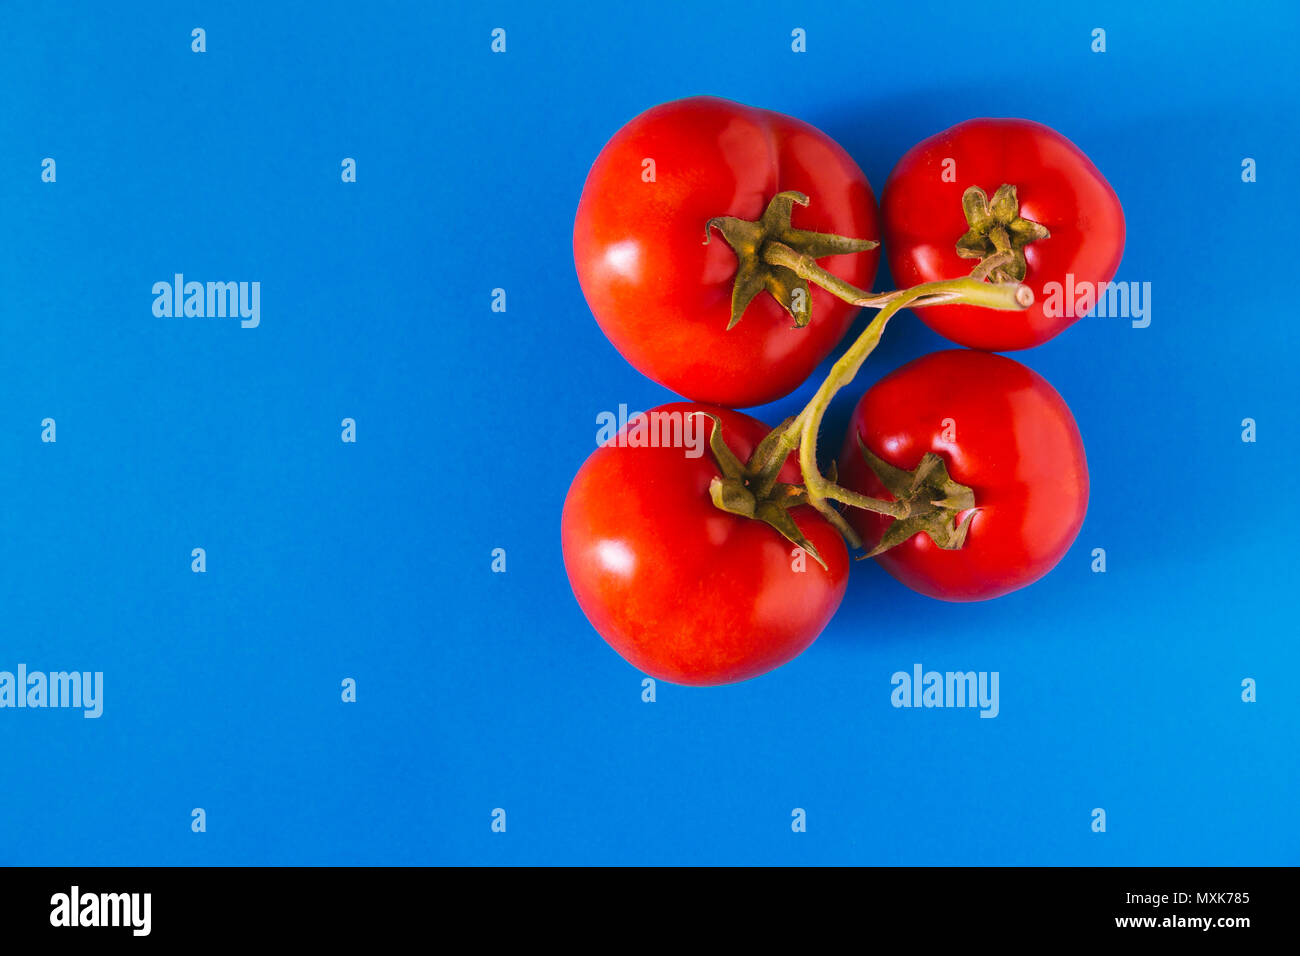 Tomatoes on a blue background. Complementary colors Stock Photo